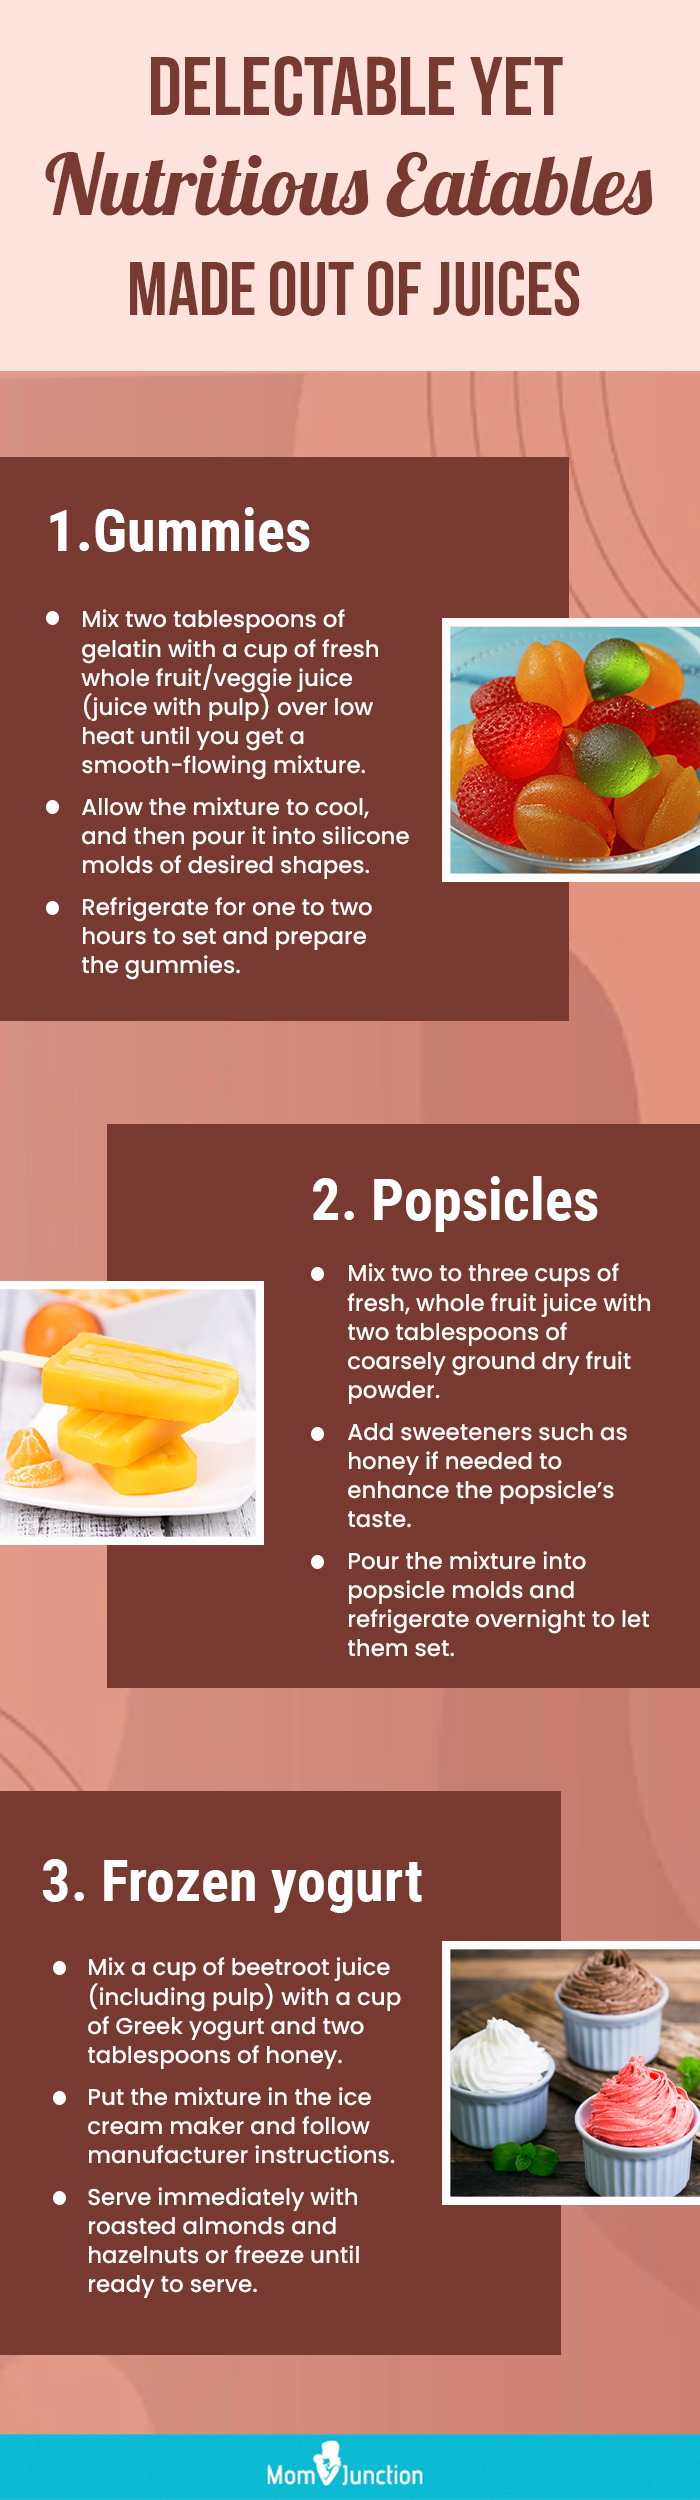 homemade juices for children [infographic]